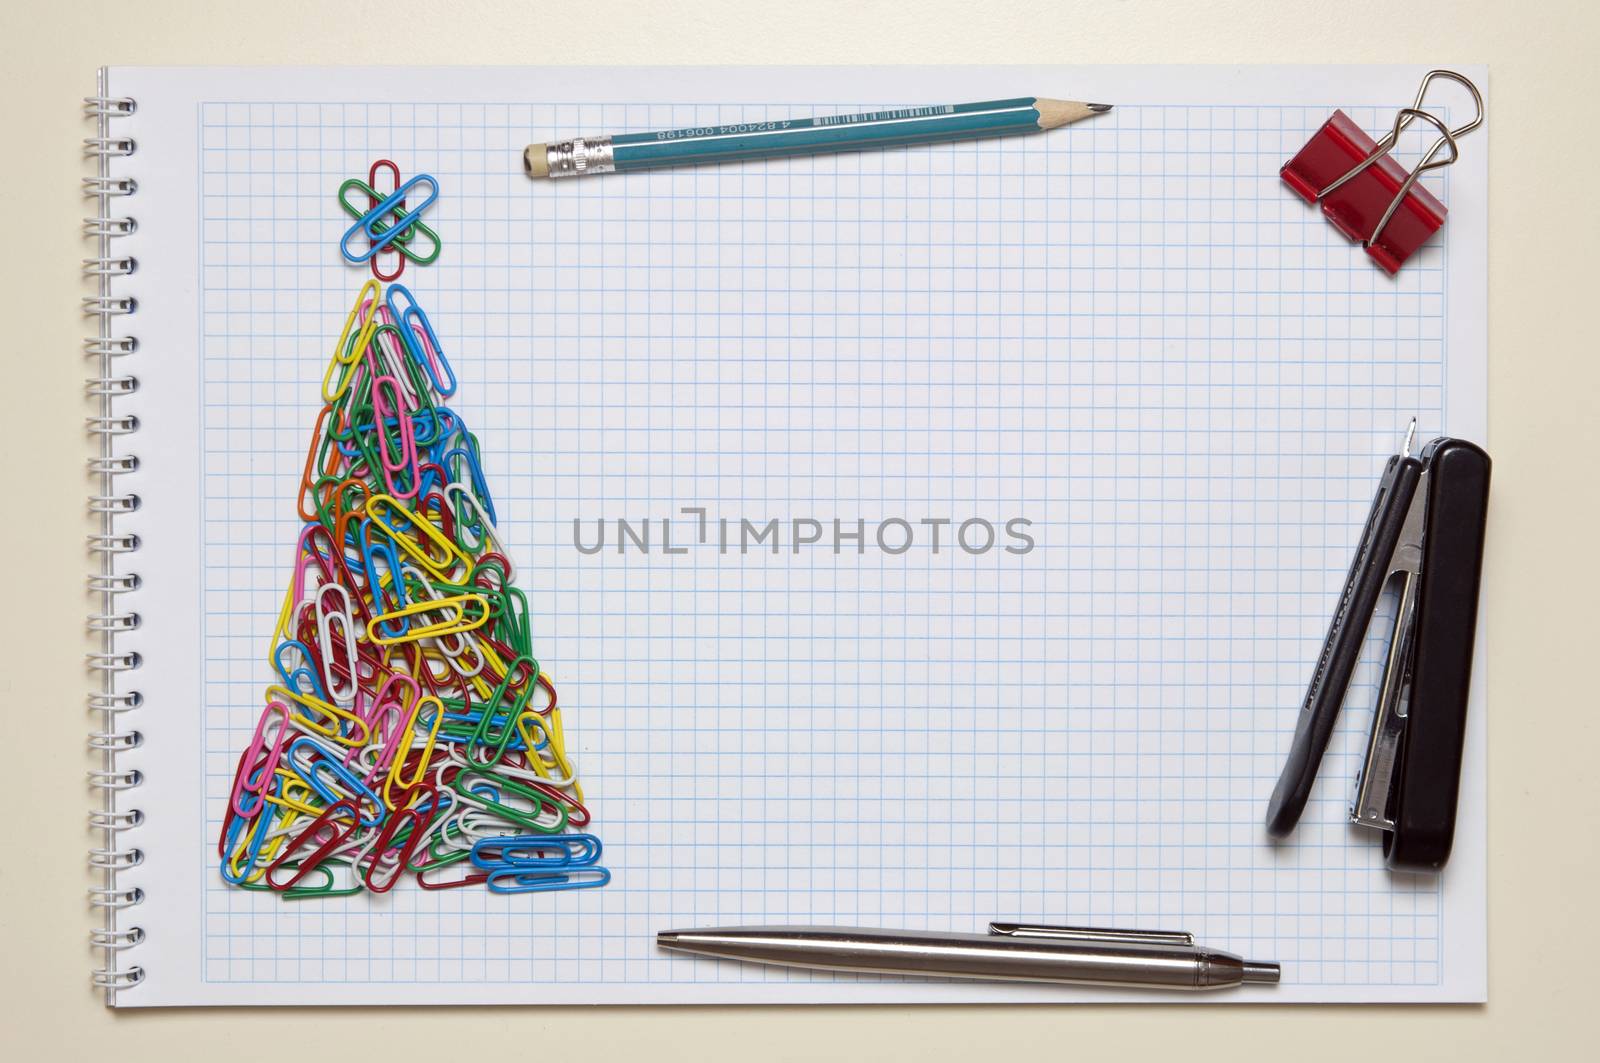 Christmas greeting card made of stationery by dred